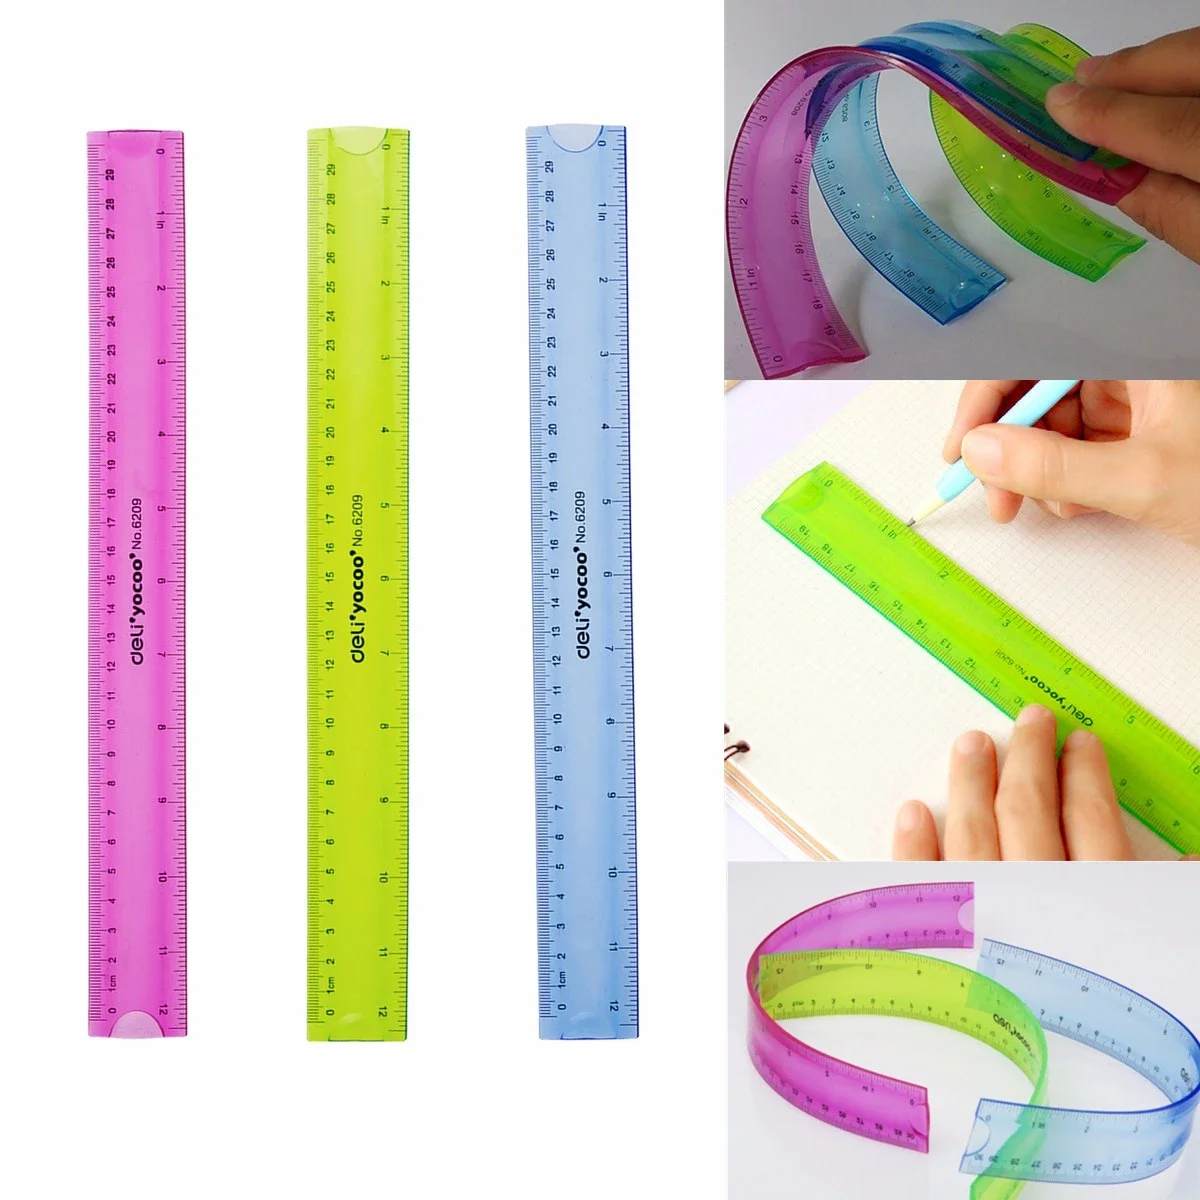 12 30cm Super Flexible Ruler Rule Measuring Tool Stationery for Office School